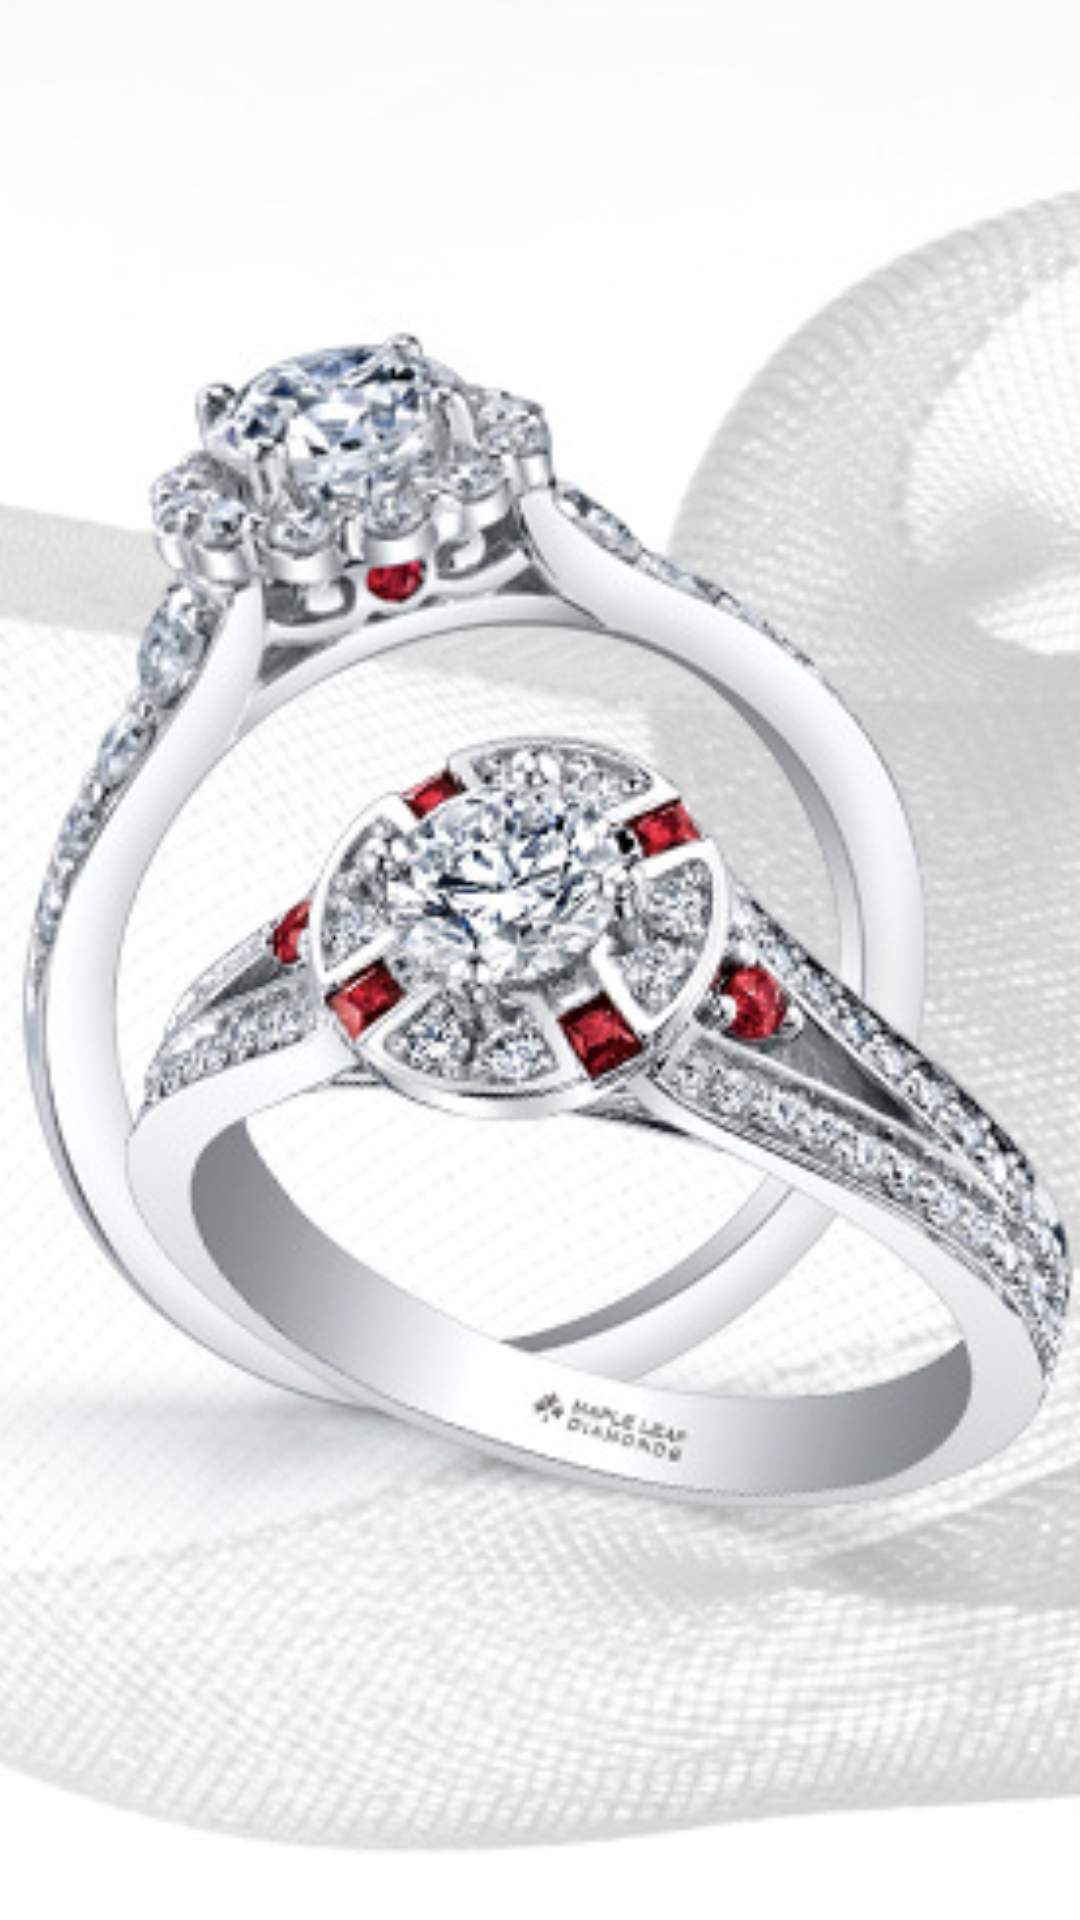 Twig and Maple Leaf Engagement Ring White Gold and Rustic Salt & Pepper  Diamond - Doron Merav